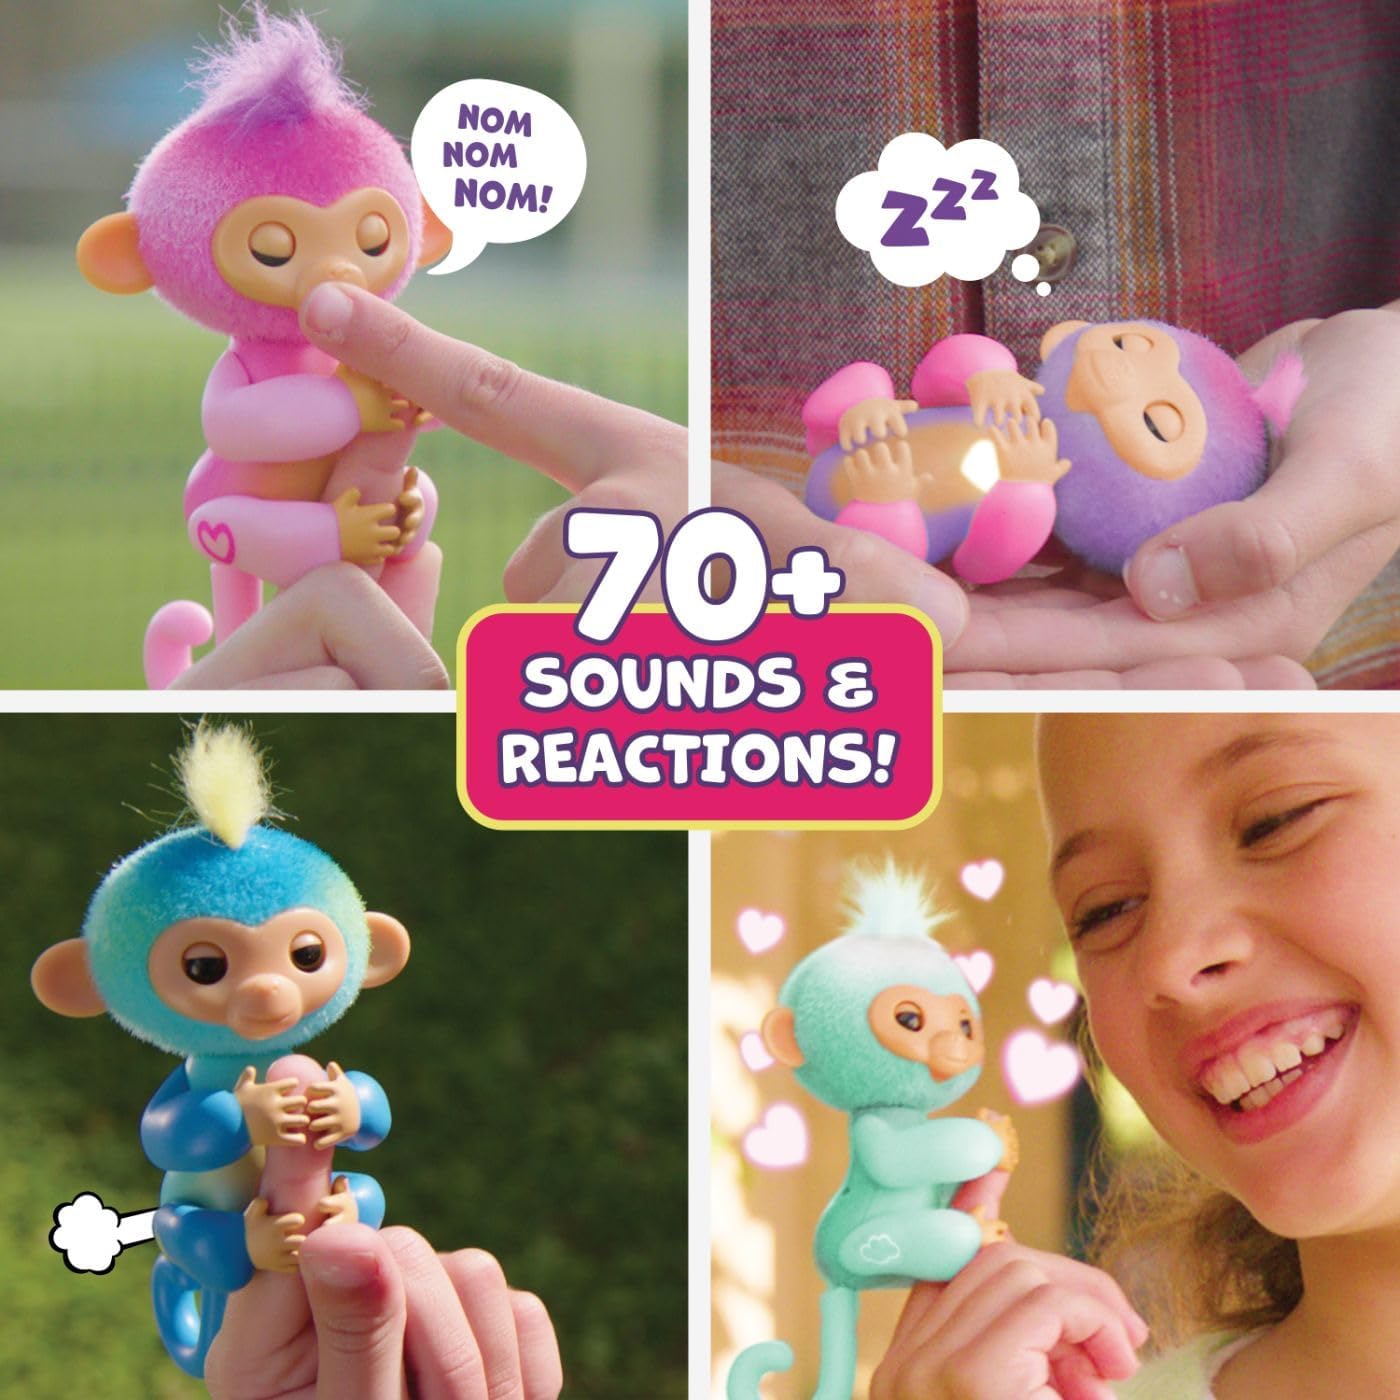 Interactive Baby Monkey Reacts to Touch – 70+ Sounds & Reactions